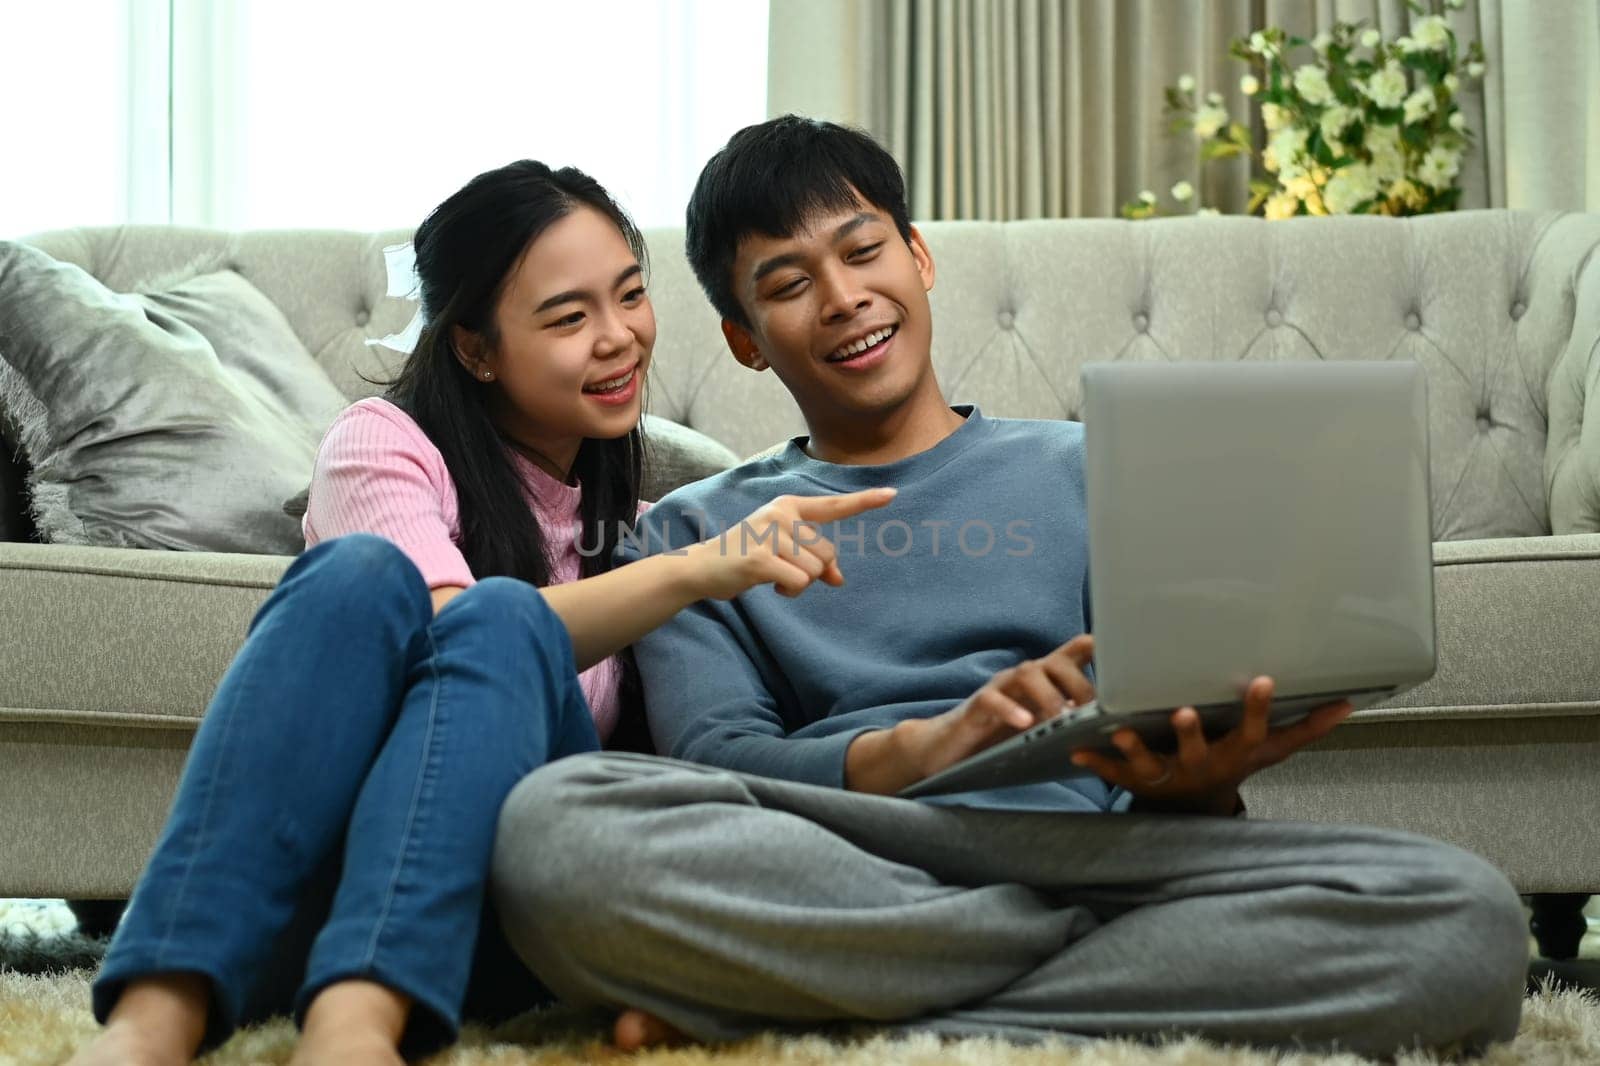 Happy young couple in casual outfit sitting carpet in living room and using laptop together.